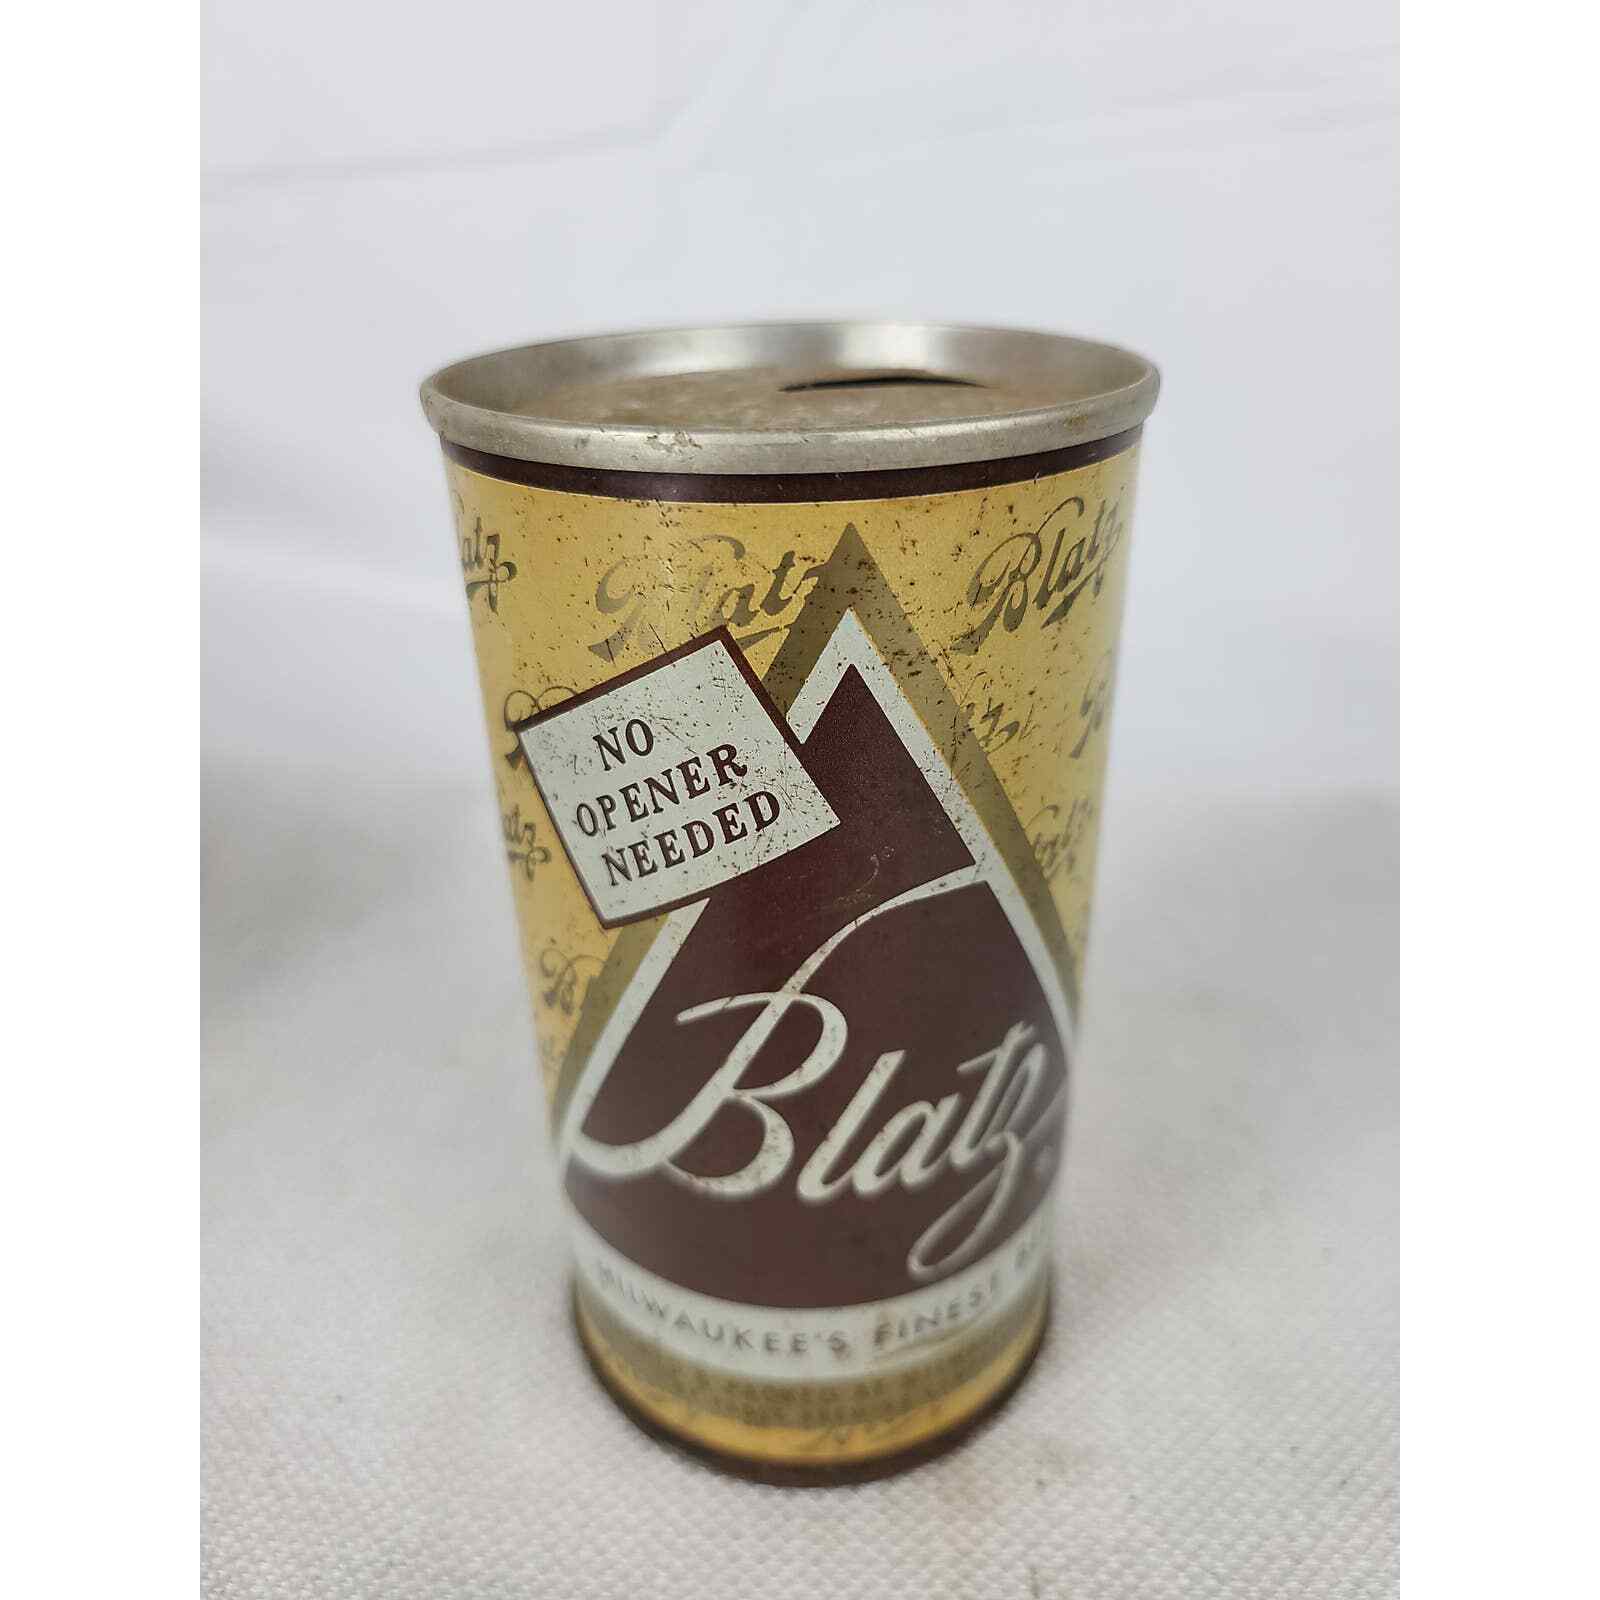 Blatz Beer Pabst Brewing Co Milwaukee WI Pull Tab Beer Can EMPTY